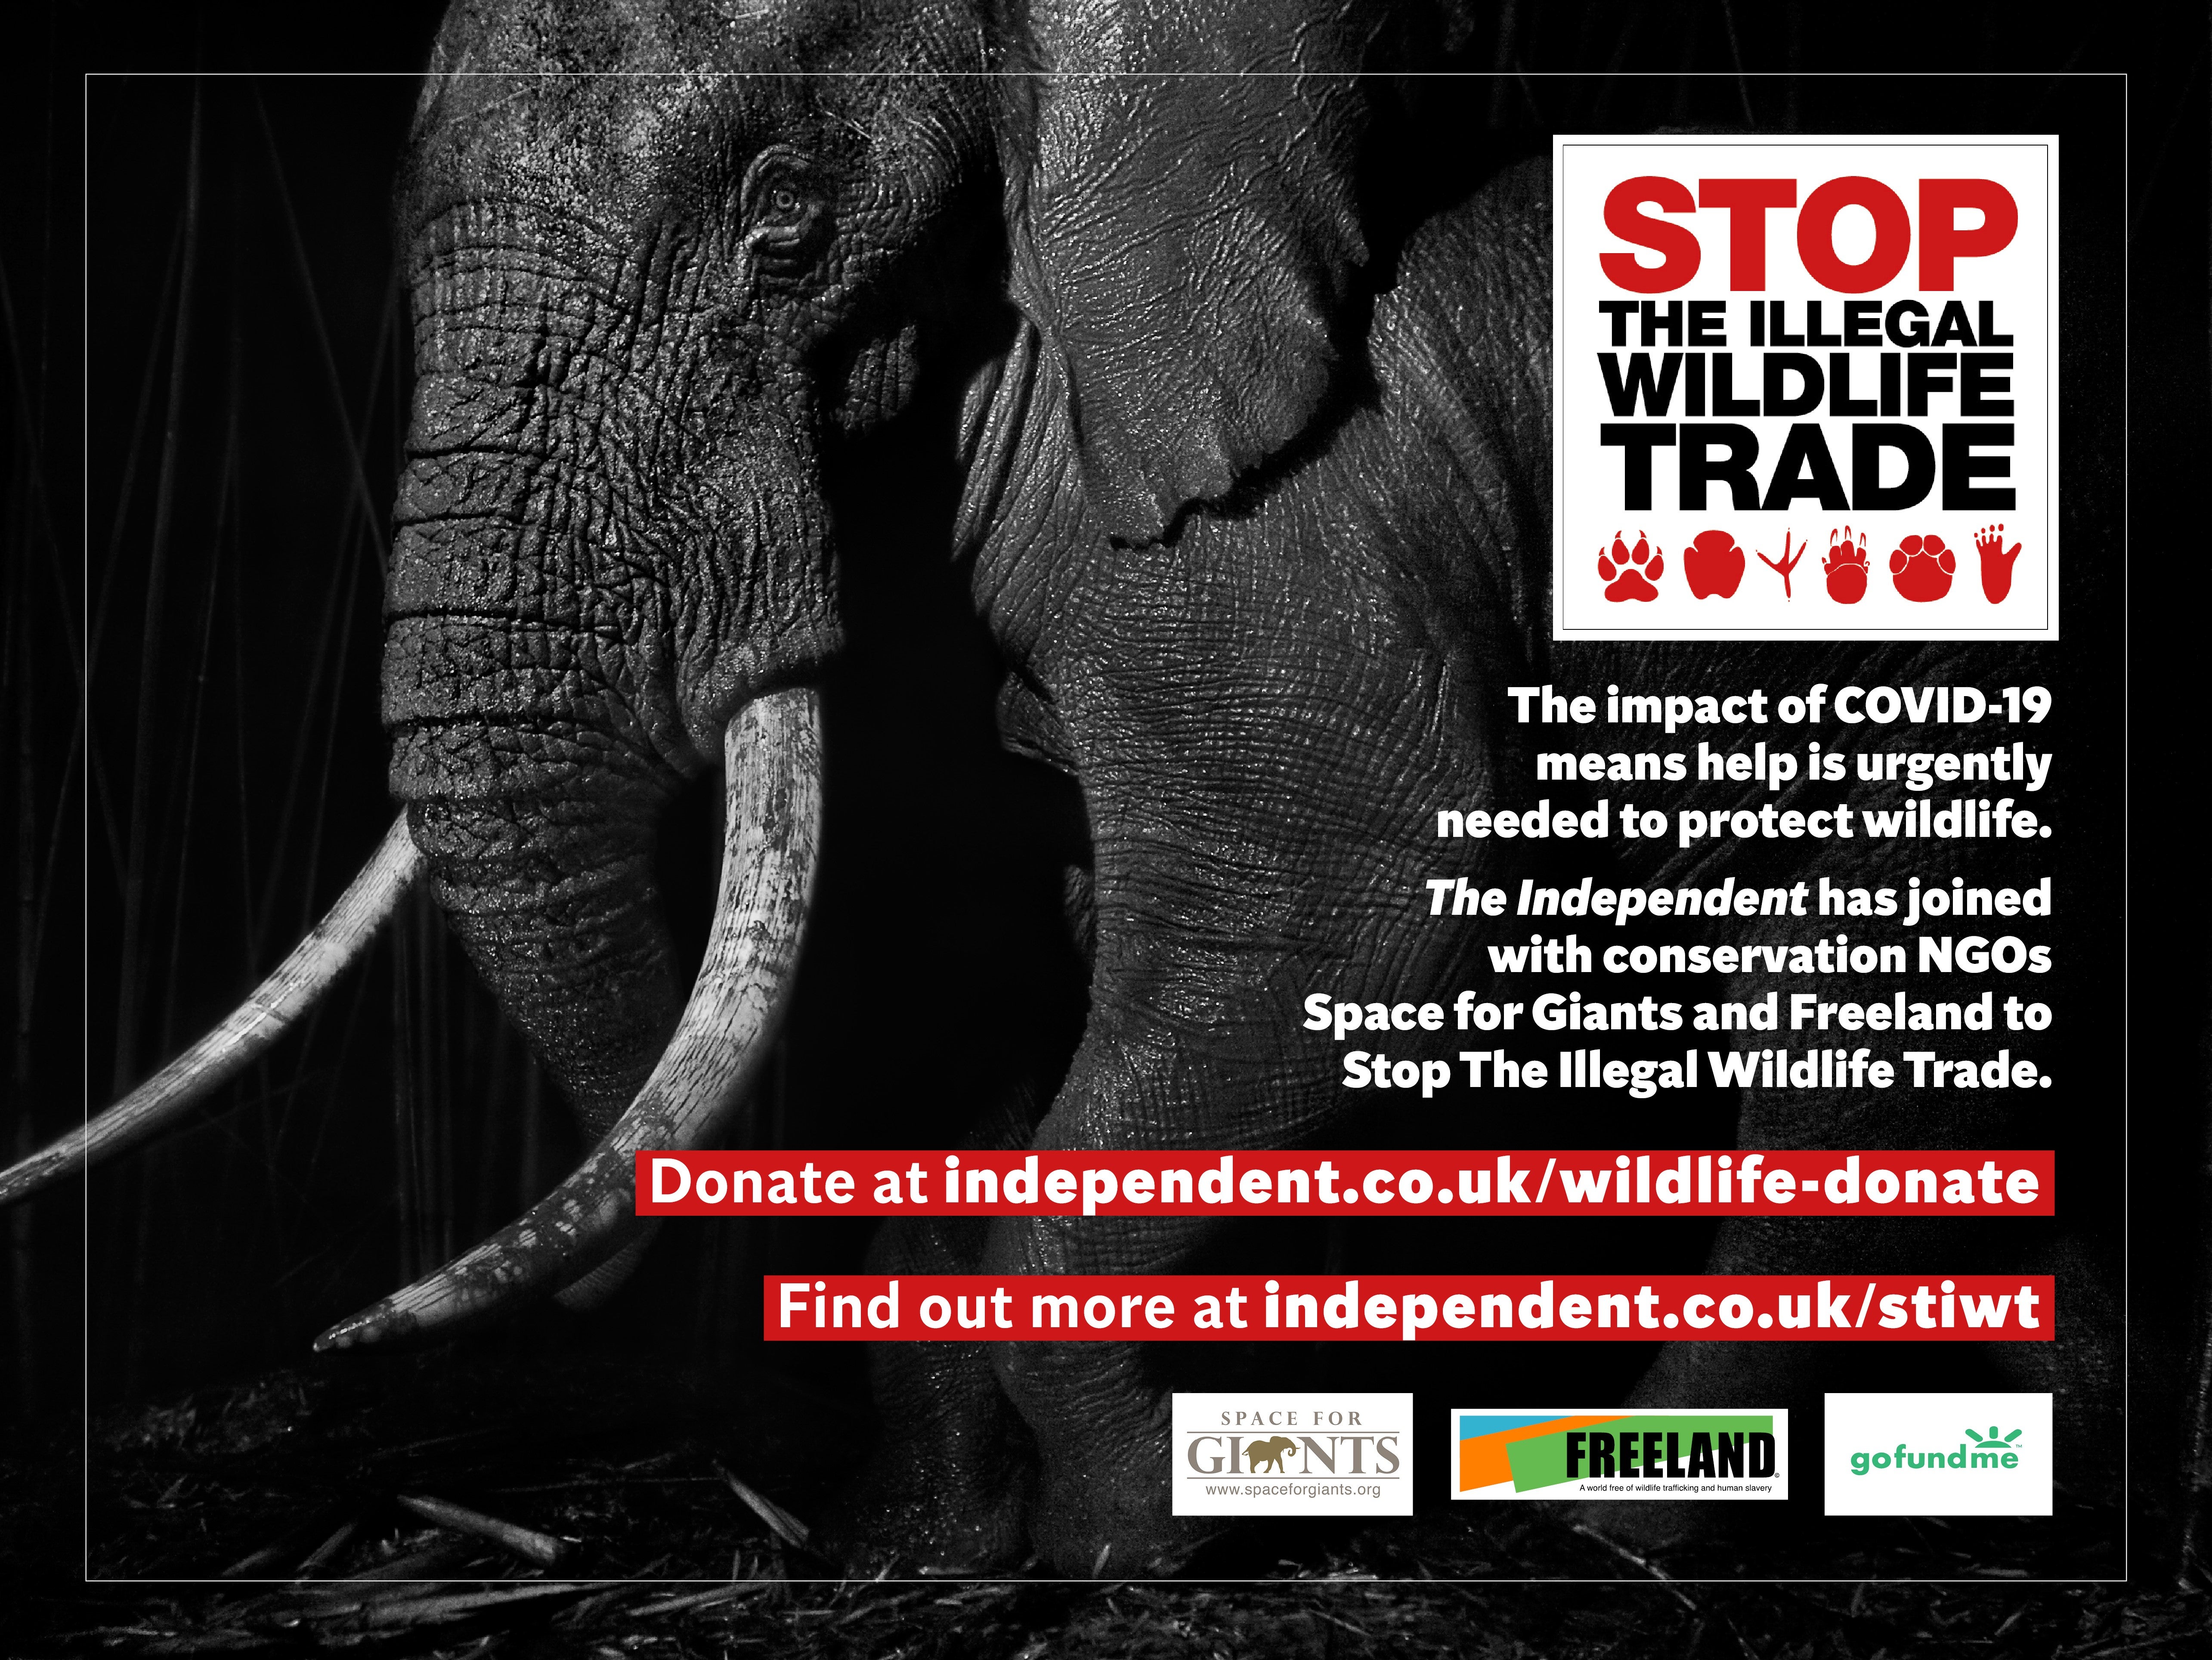 The Independent is working with conservation charity Space for Giants to protect wildlife at risk from poachers due to the conservation funding crisis caused by Covid-19. You can donate HERE